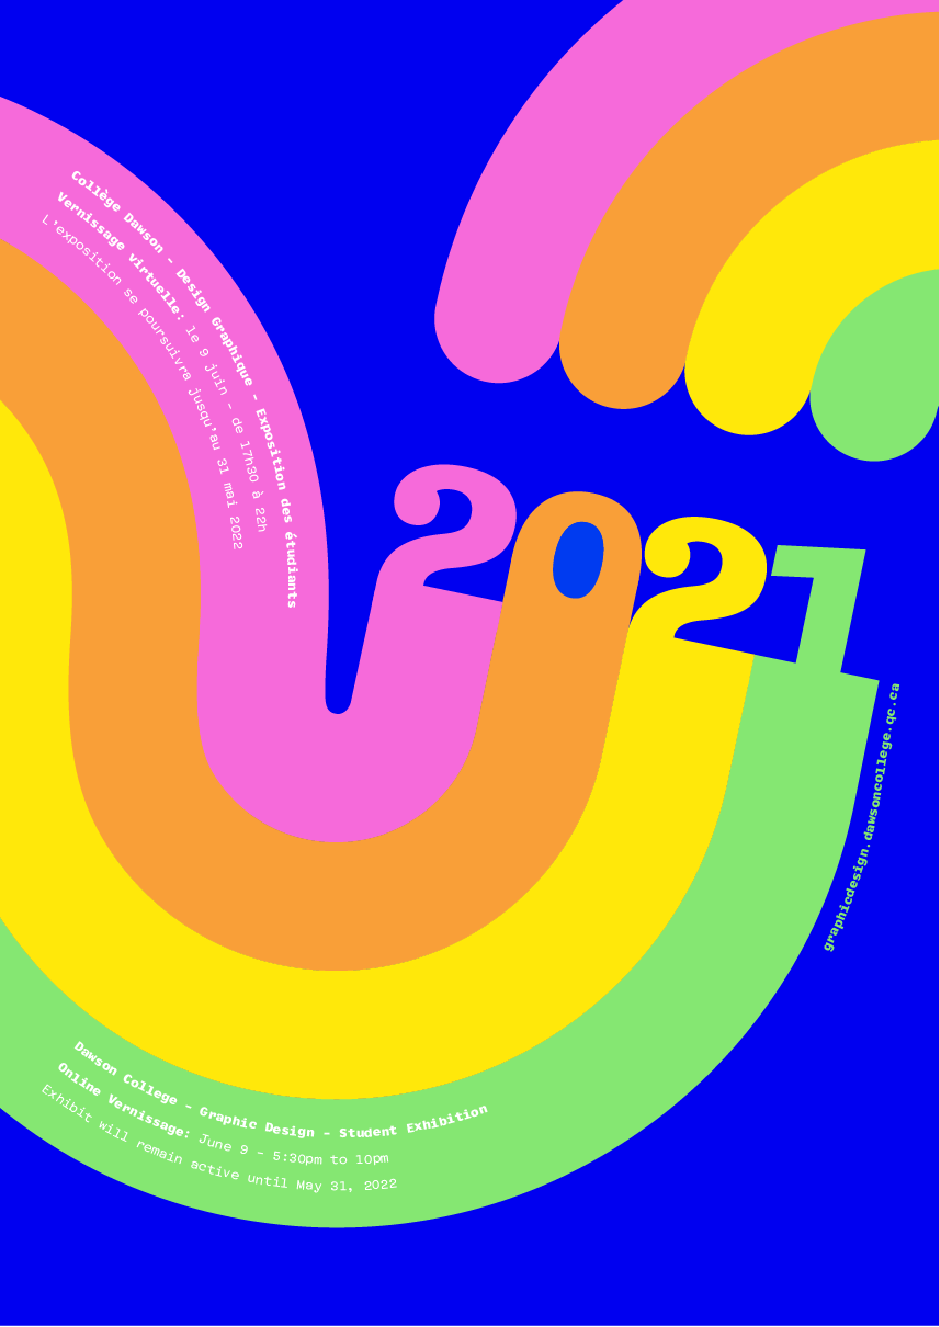 Dawson College Graphic Design vernissage poster of a rainbow that leads into "2021".